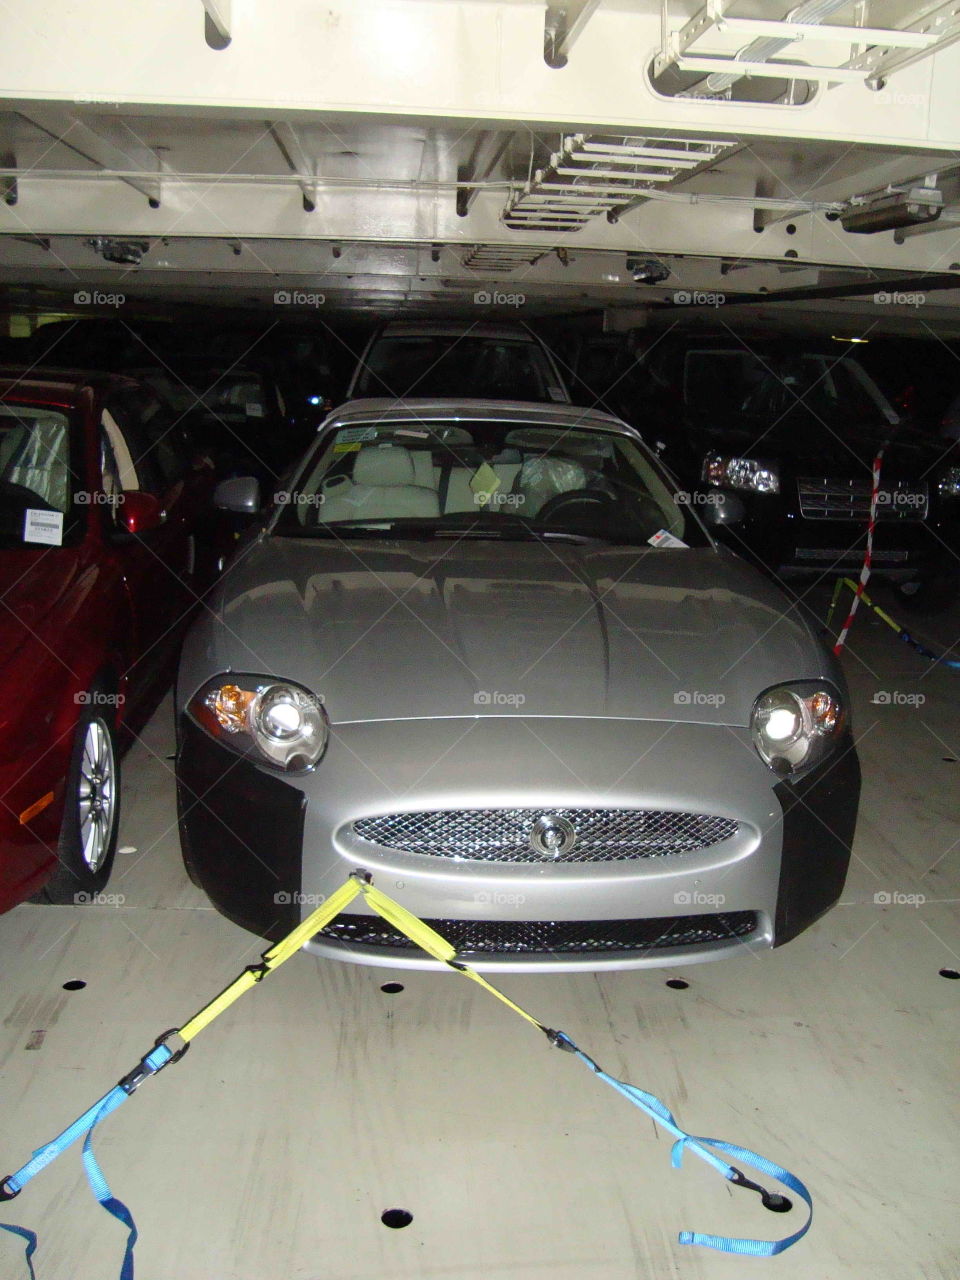 # Jaguar# car# sexy# fast and furious# ships deck# lashed on ship#